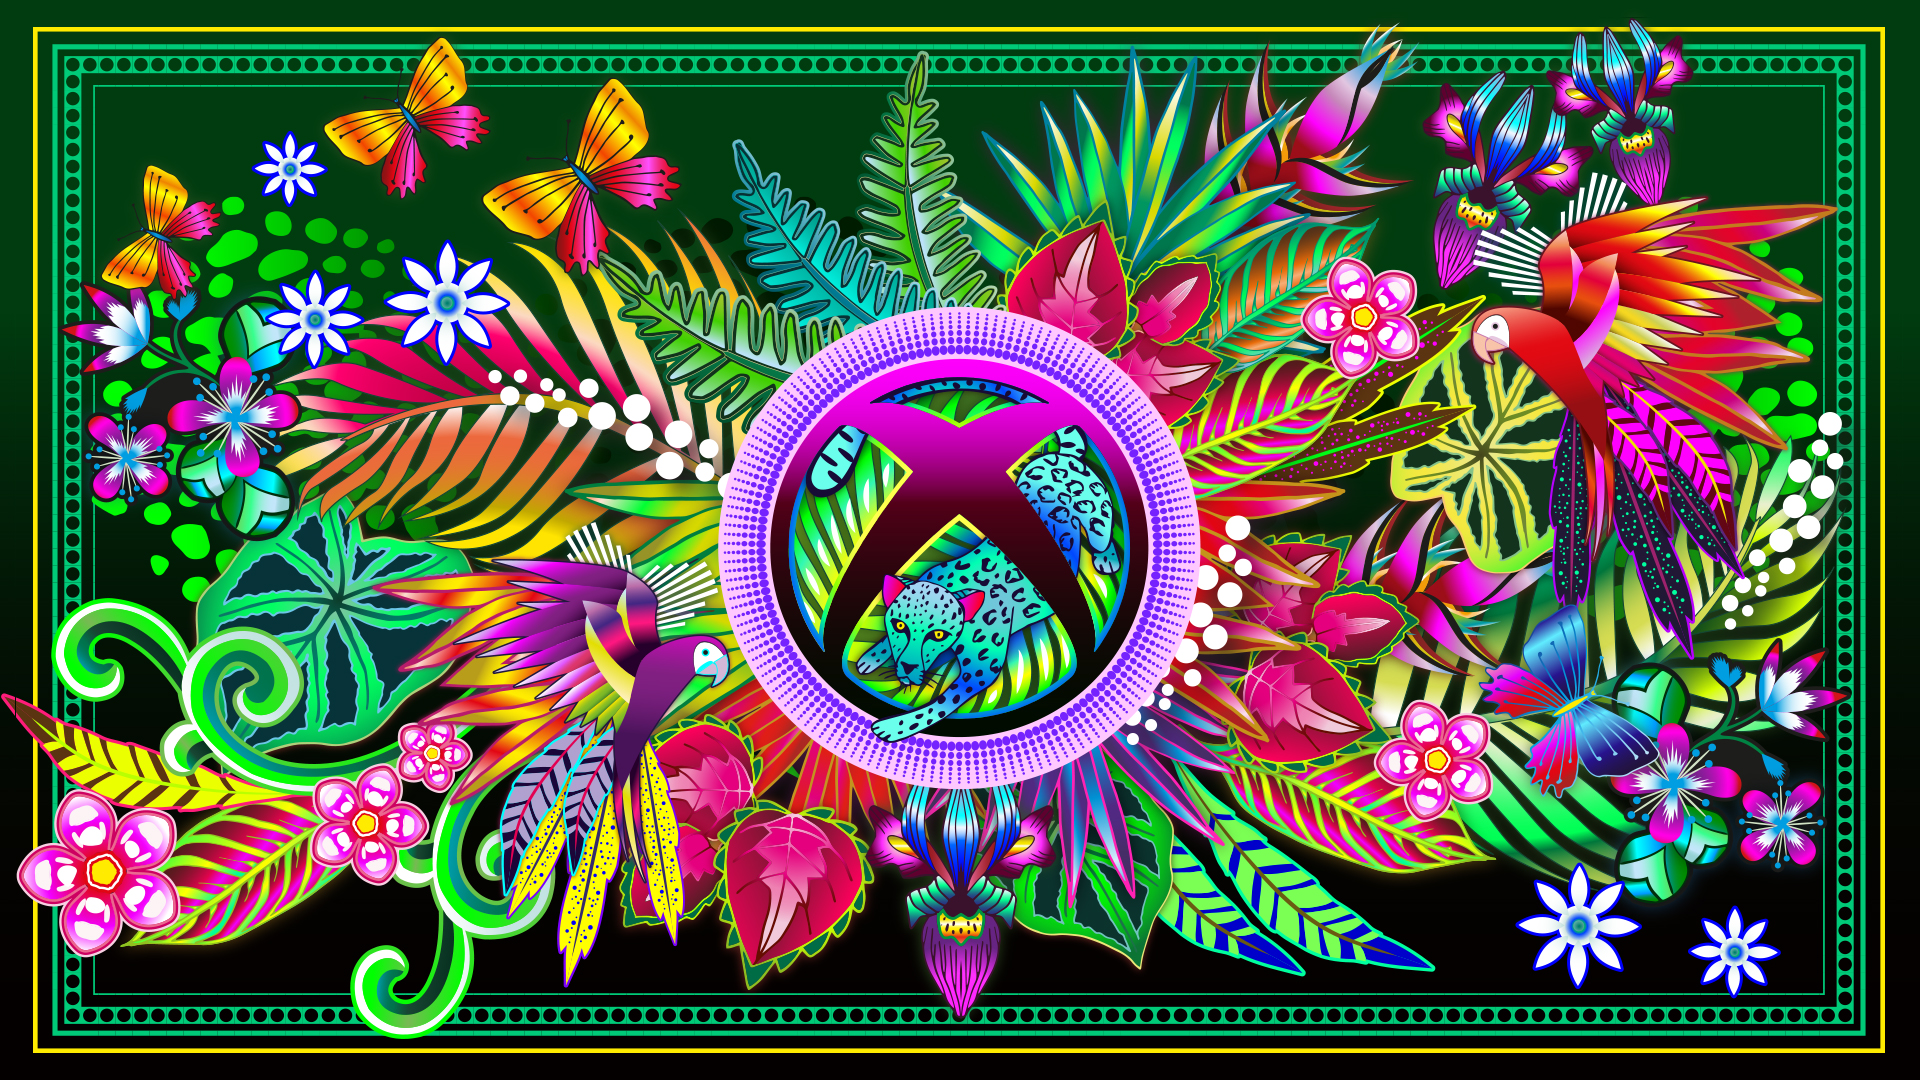 A stylized Xbox logo featuring a jaguar on a background of colorful rainforest botanicals, macaws, and butterflies.